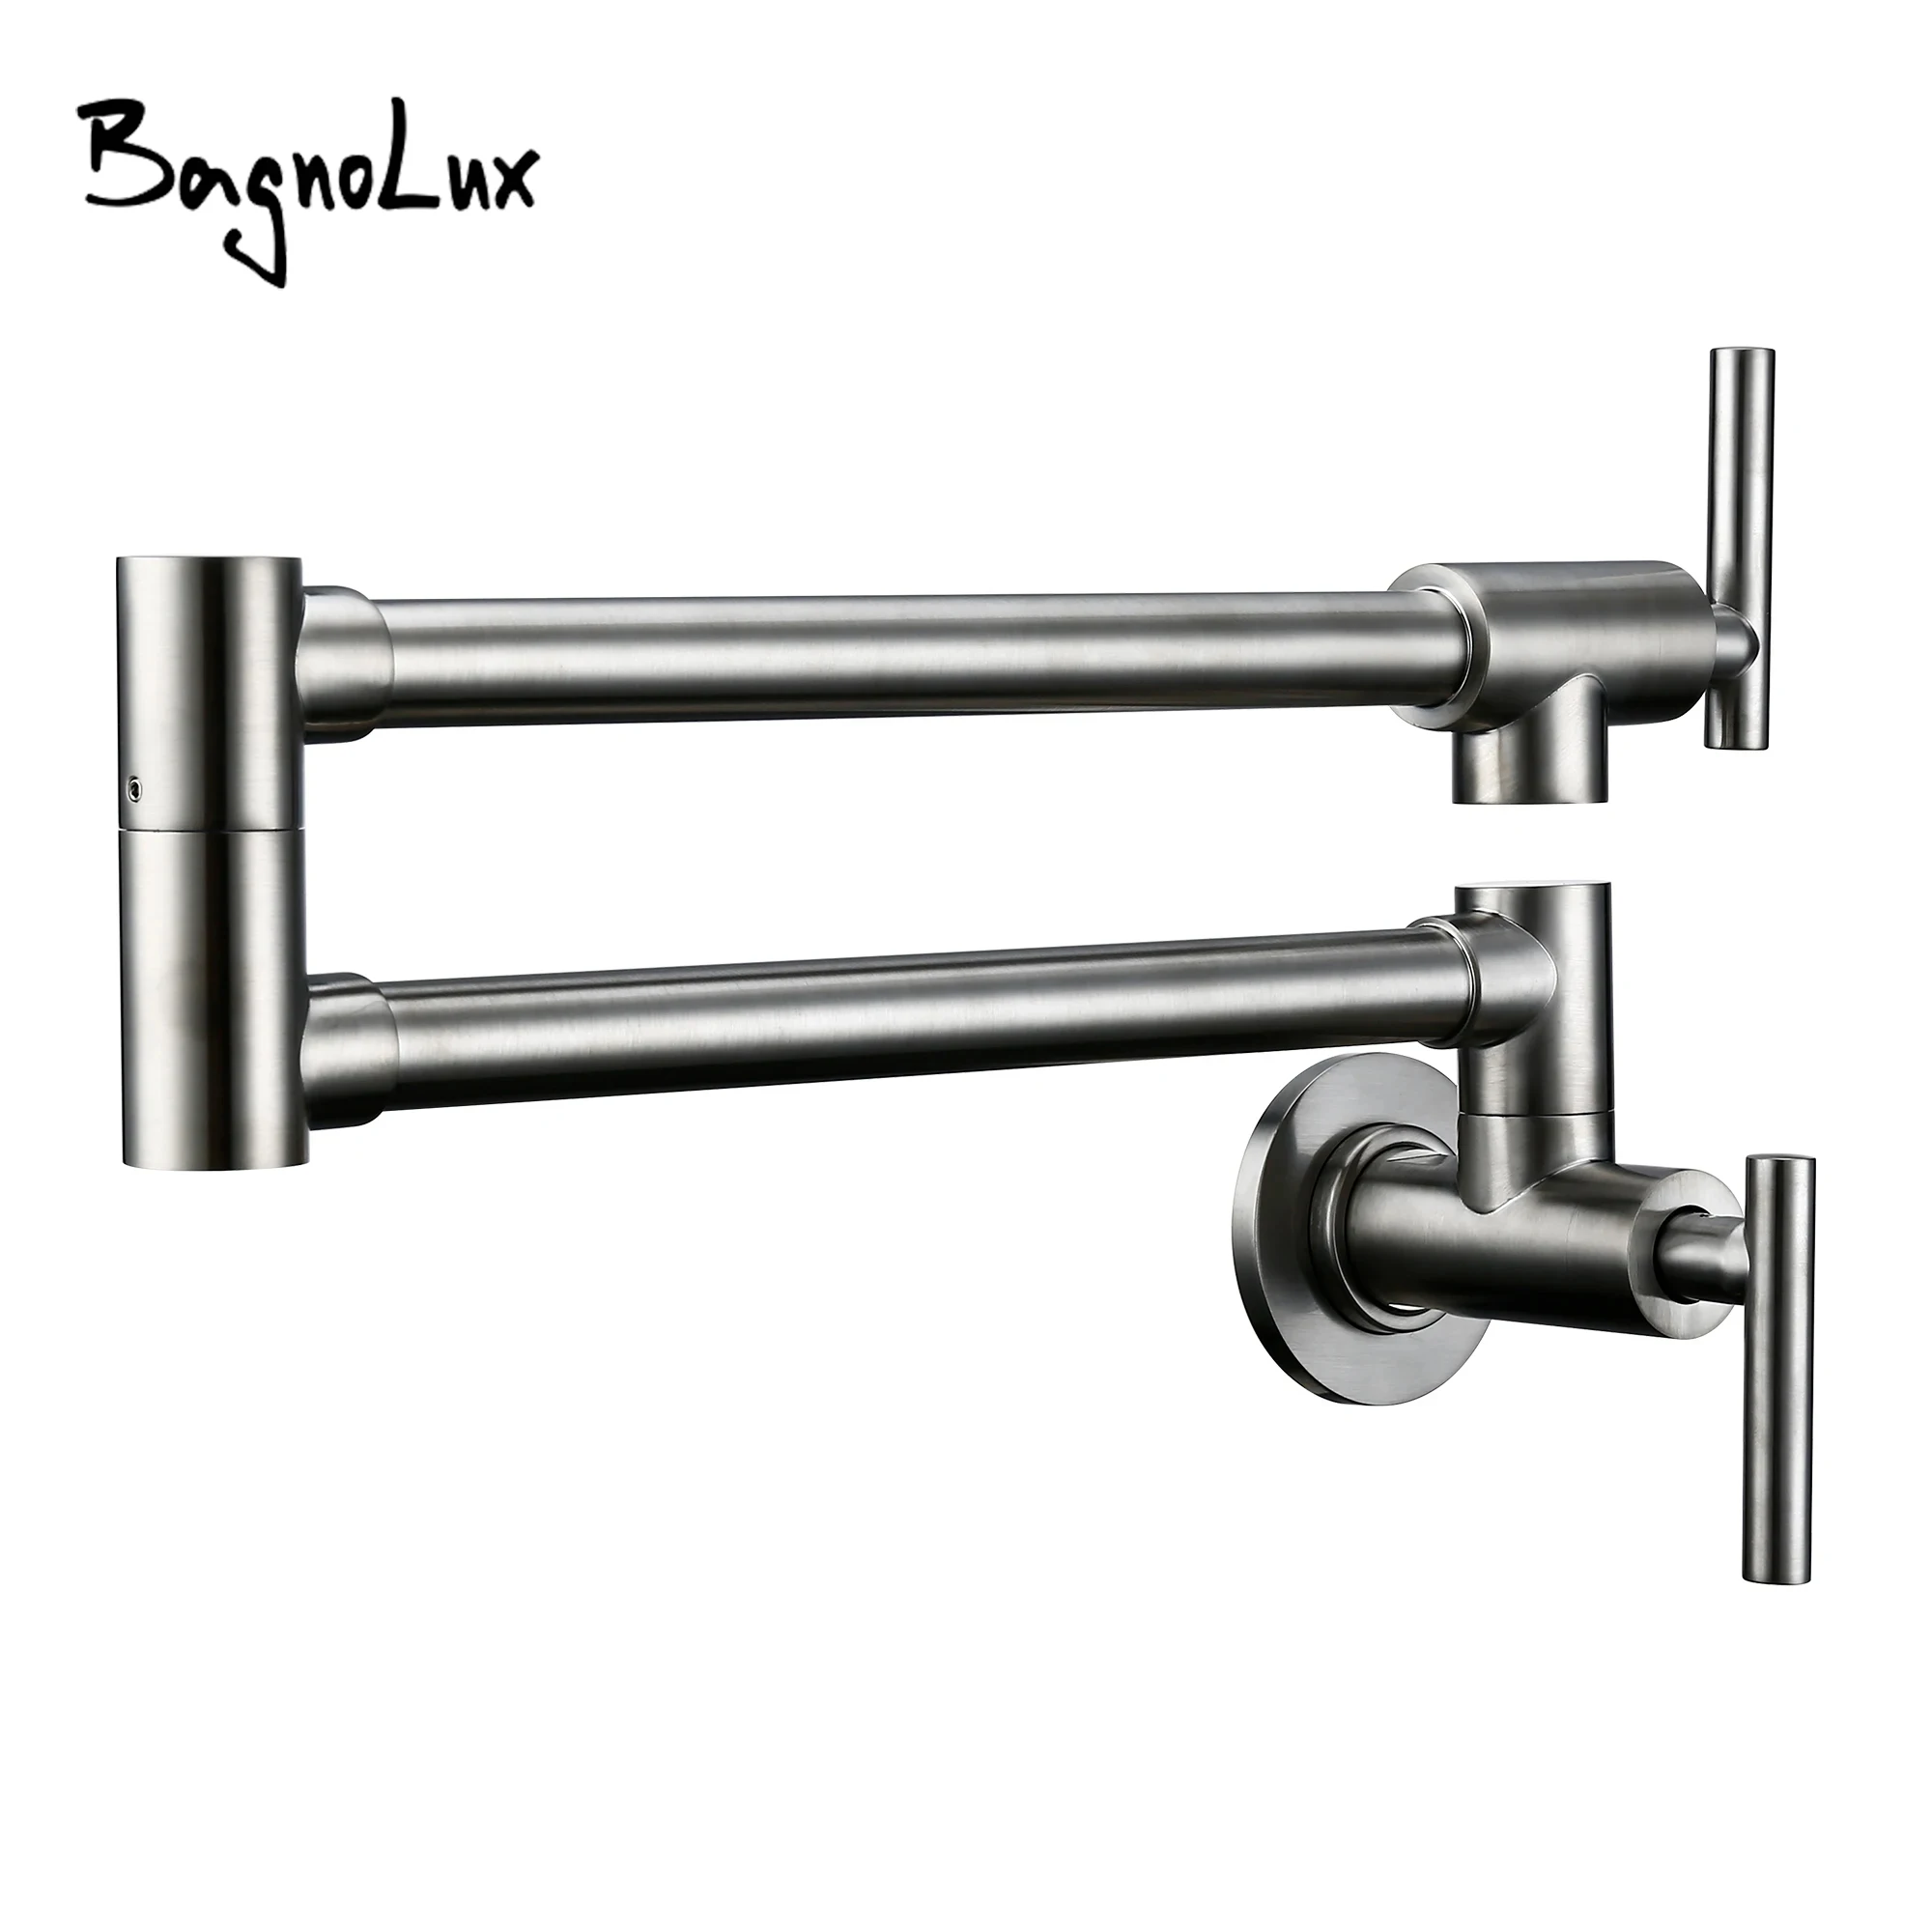 Black Brushed Chrome Brass Wall Mounted Pot Filler Faucet Swivel Folding Retractable Rotary Stretch Sink Tap Kitchen Faucet